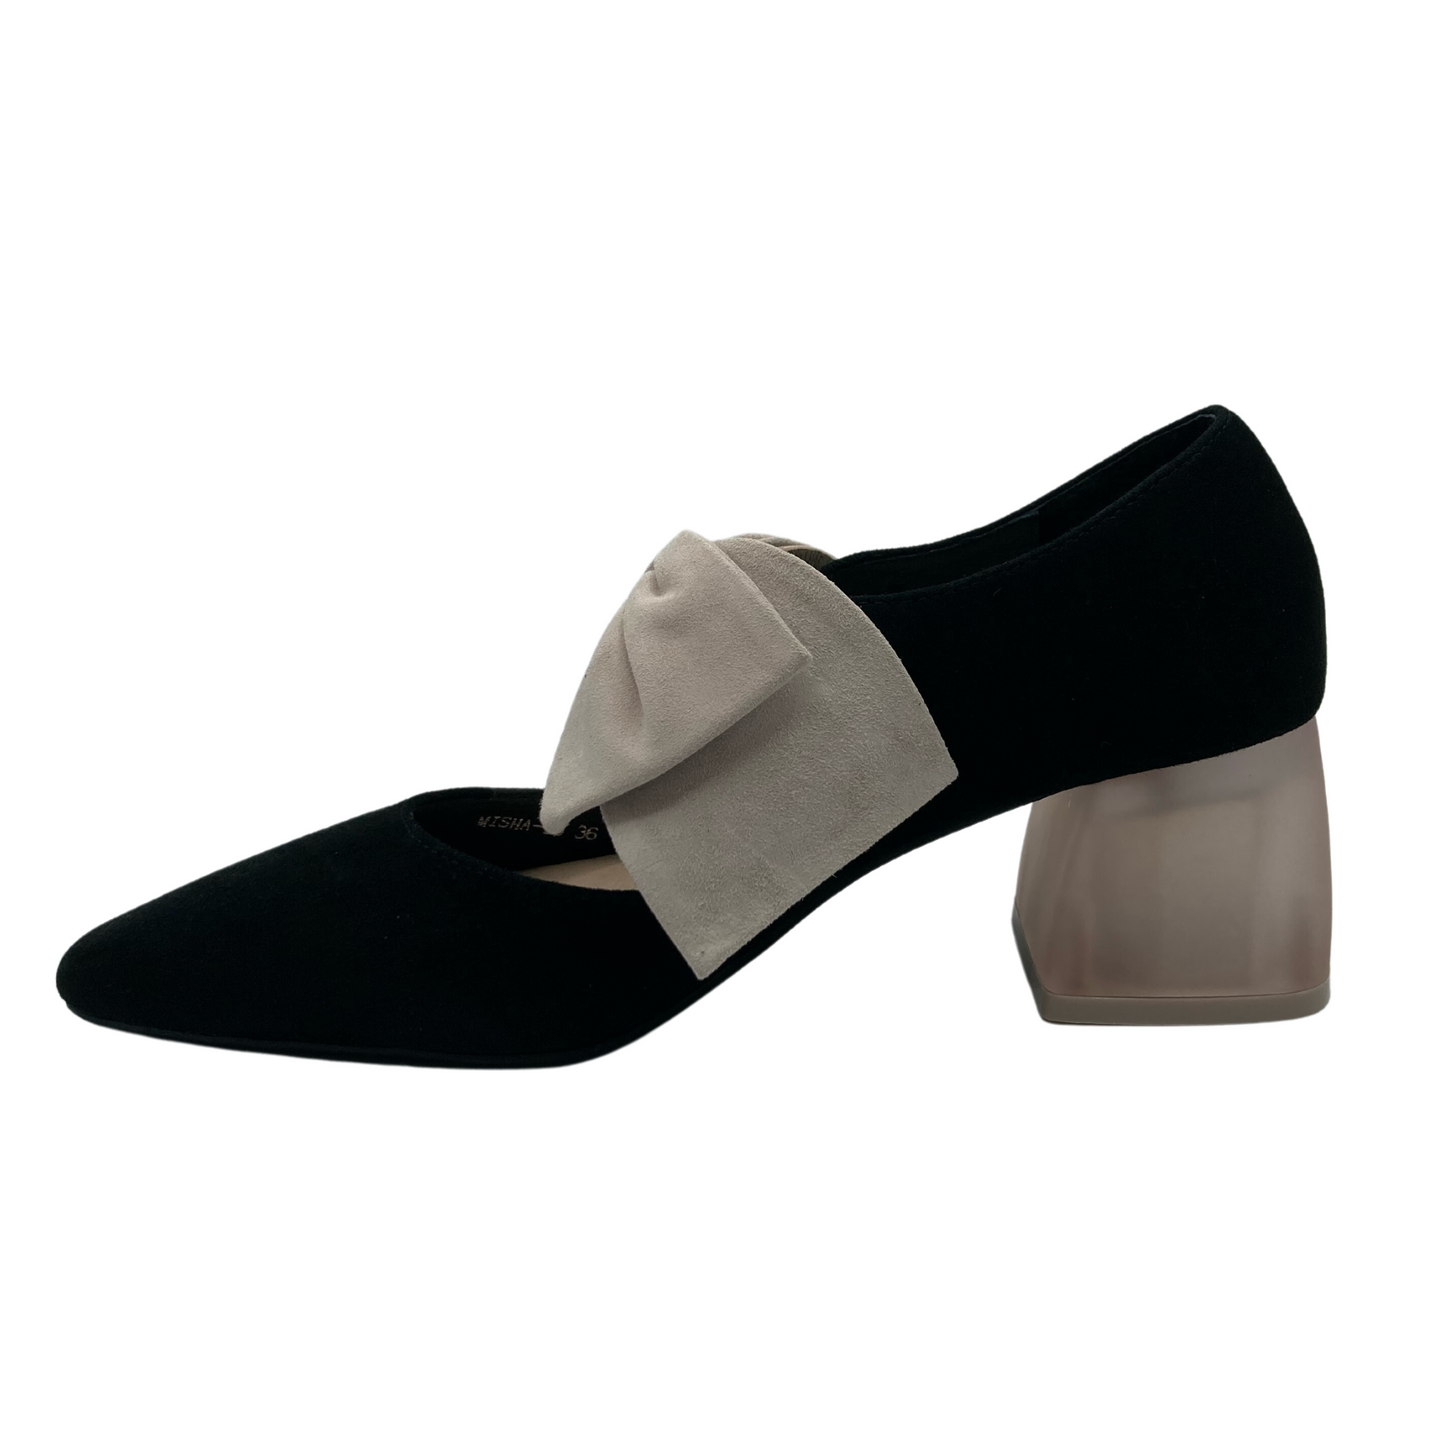 Left facing view of black heeled shoe with lucite heel and vanilla coloured bow on upper